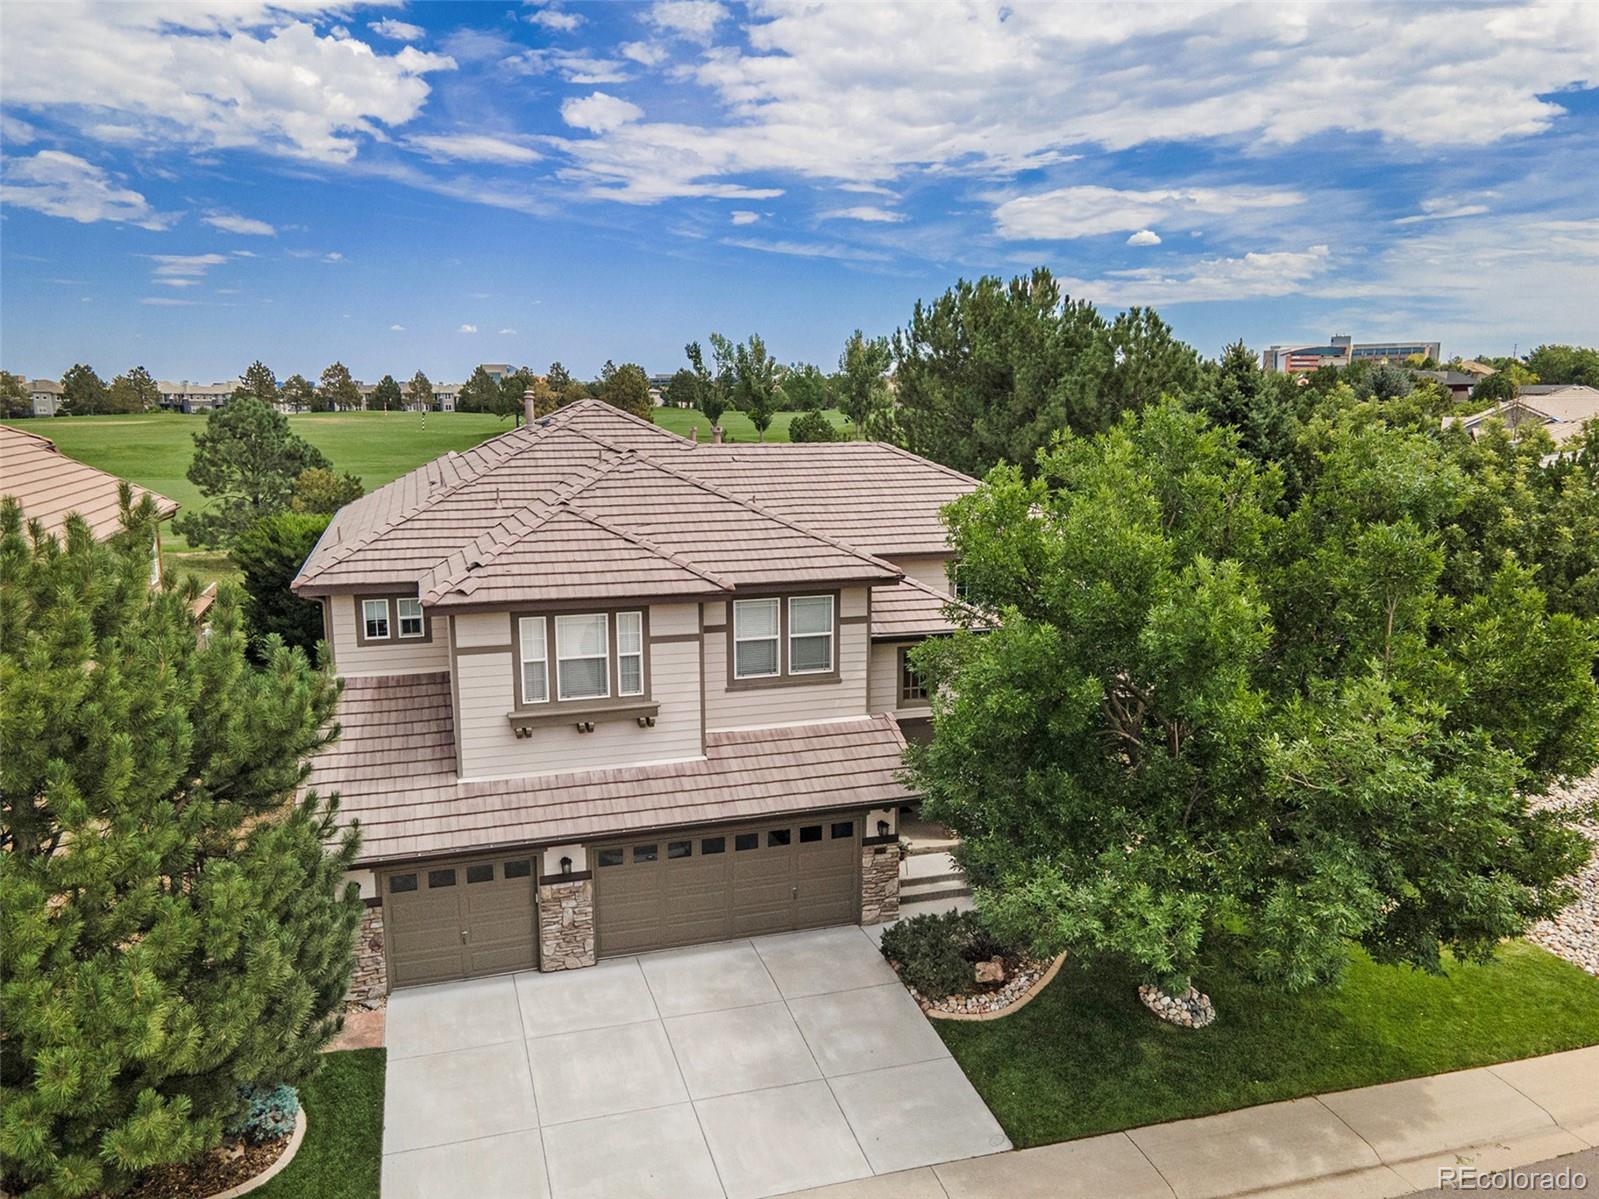 8974  Hunters Way, highlands ranch MLS: 4909916 Beds: 6 Baths: 6 Price: $1,200,000